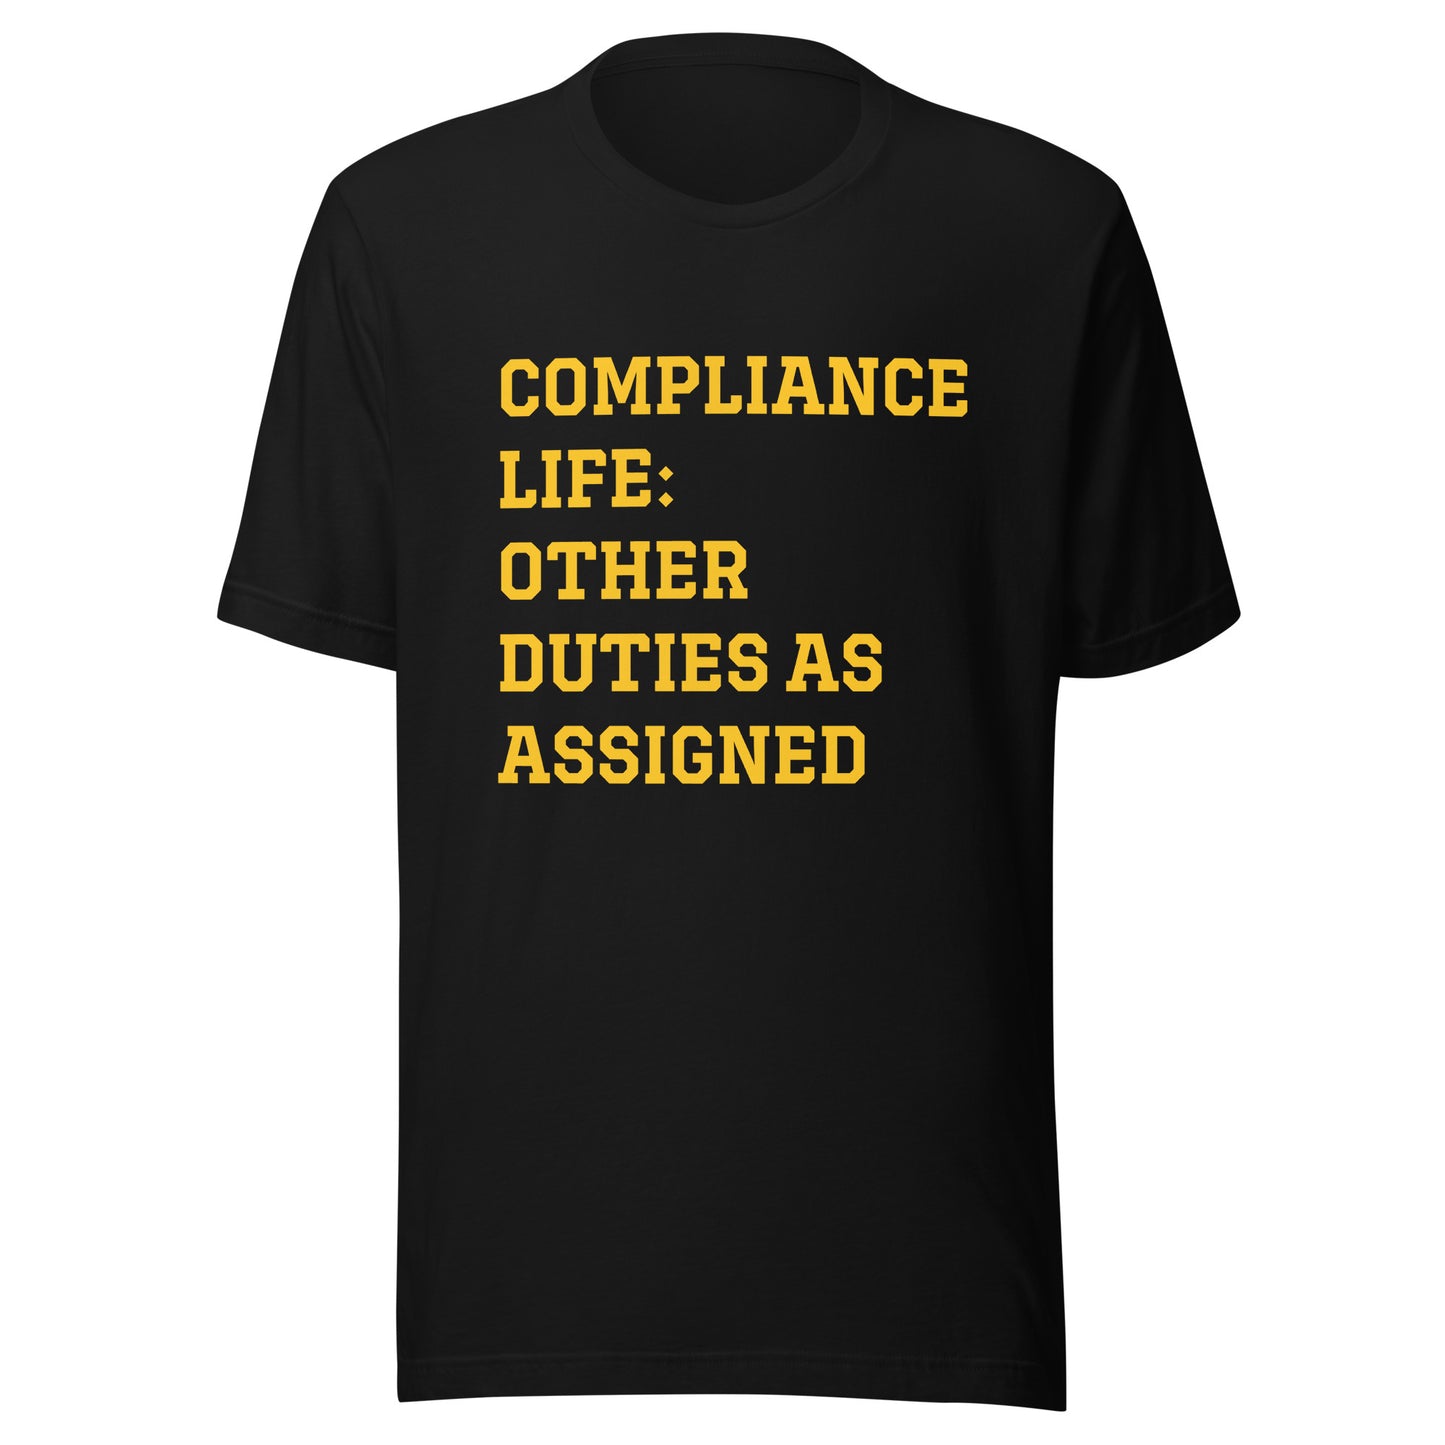 Compliance Life: Other Duties as Assigned